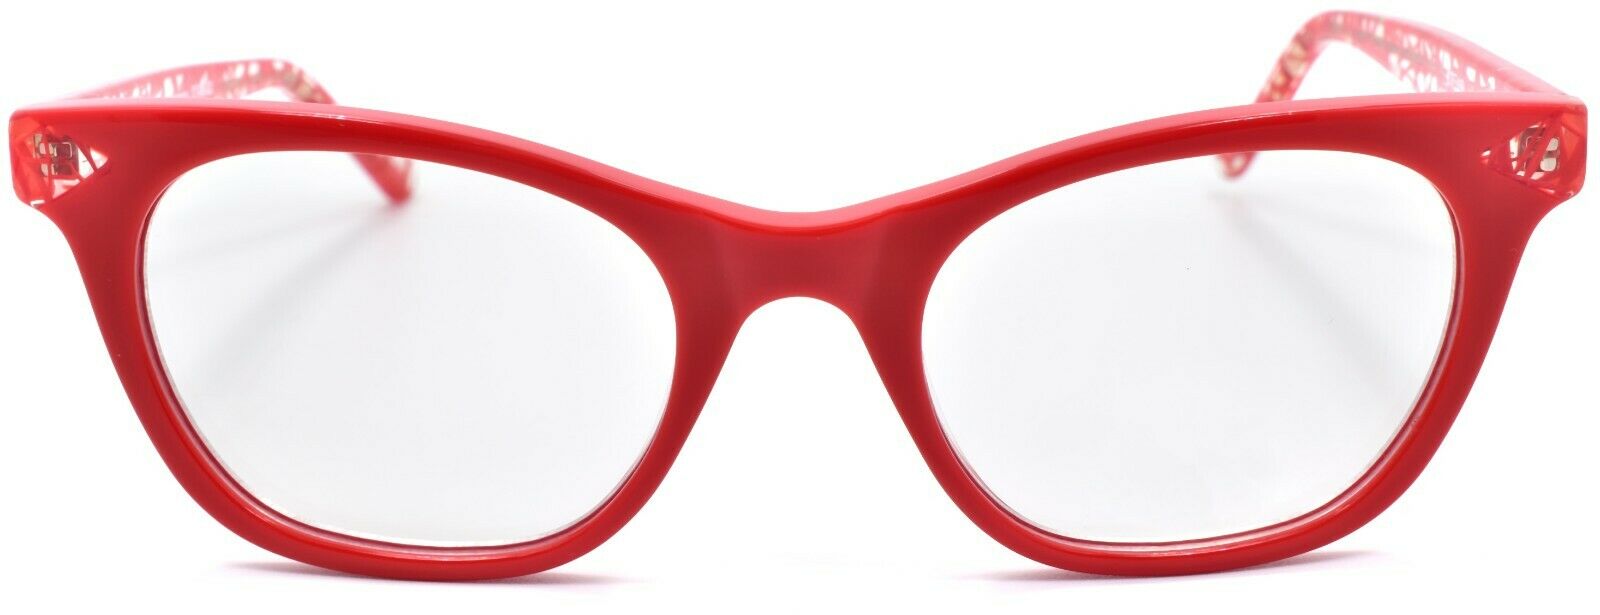 2-Eyebobs Florence 2746 01 Women's Reading Glasses Red / Red Crystal +2.00-842754160698-IKSpecs